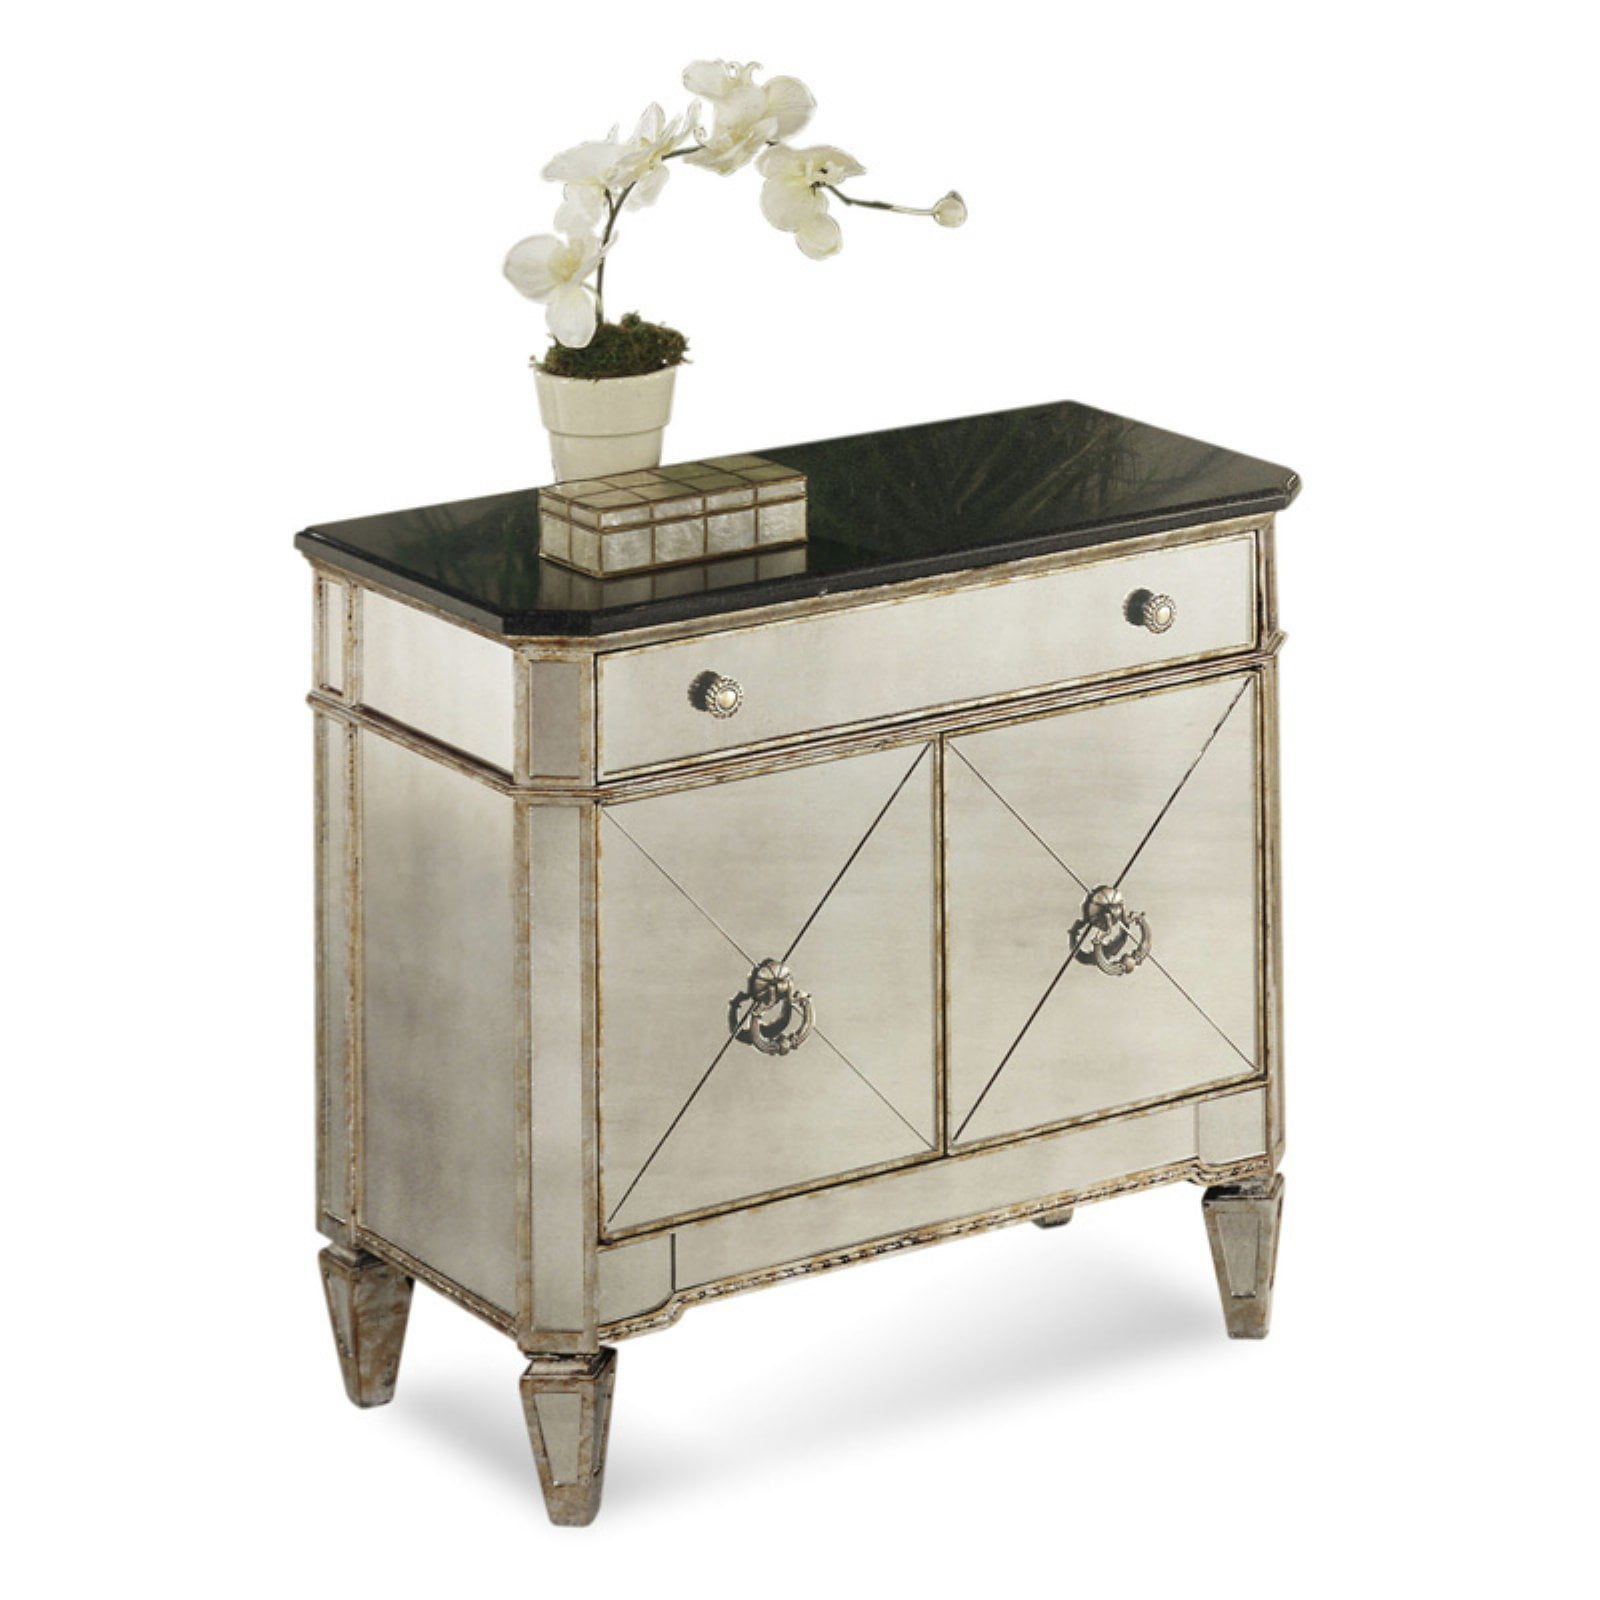 Borghese 1 Drawer 2 Door Chest, Borghese Mirrored Hall Chest